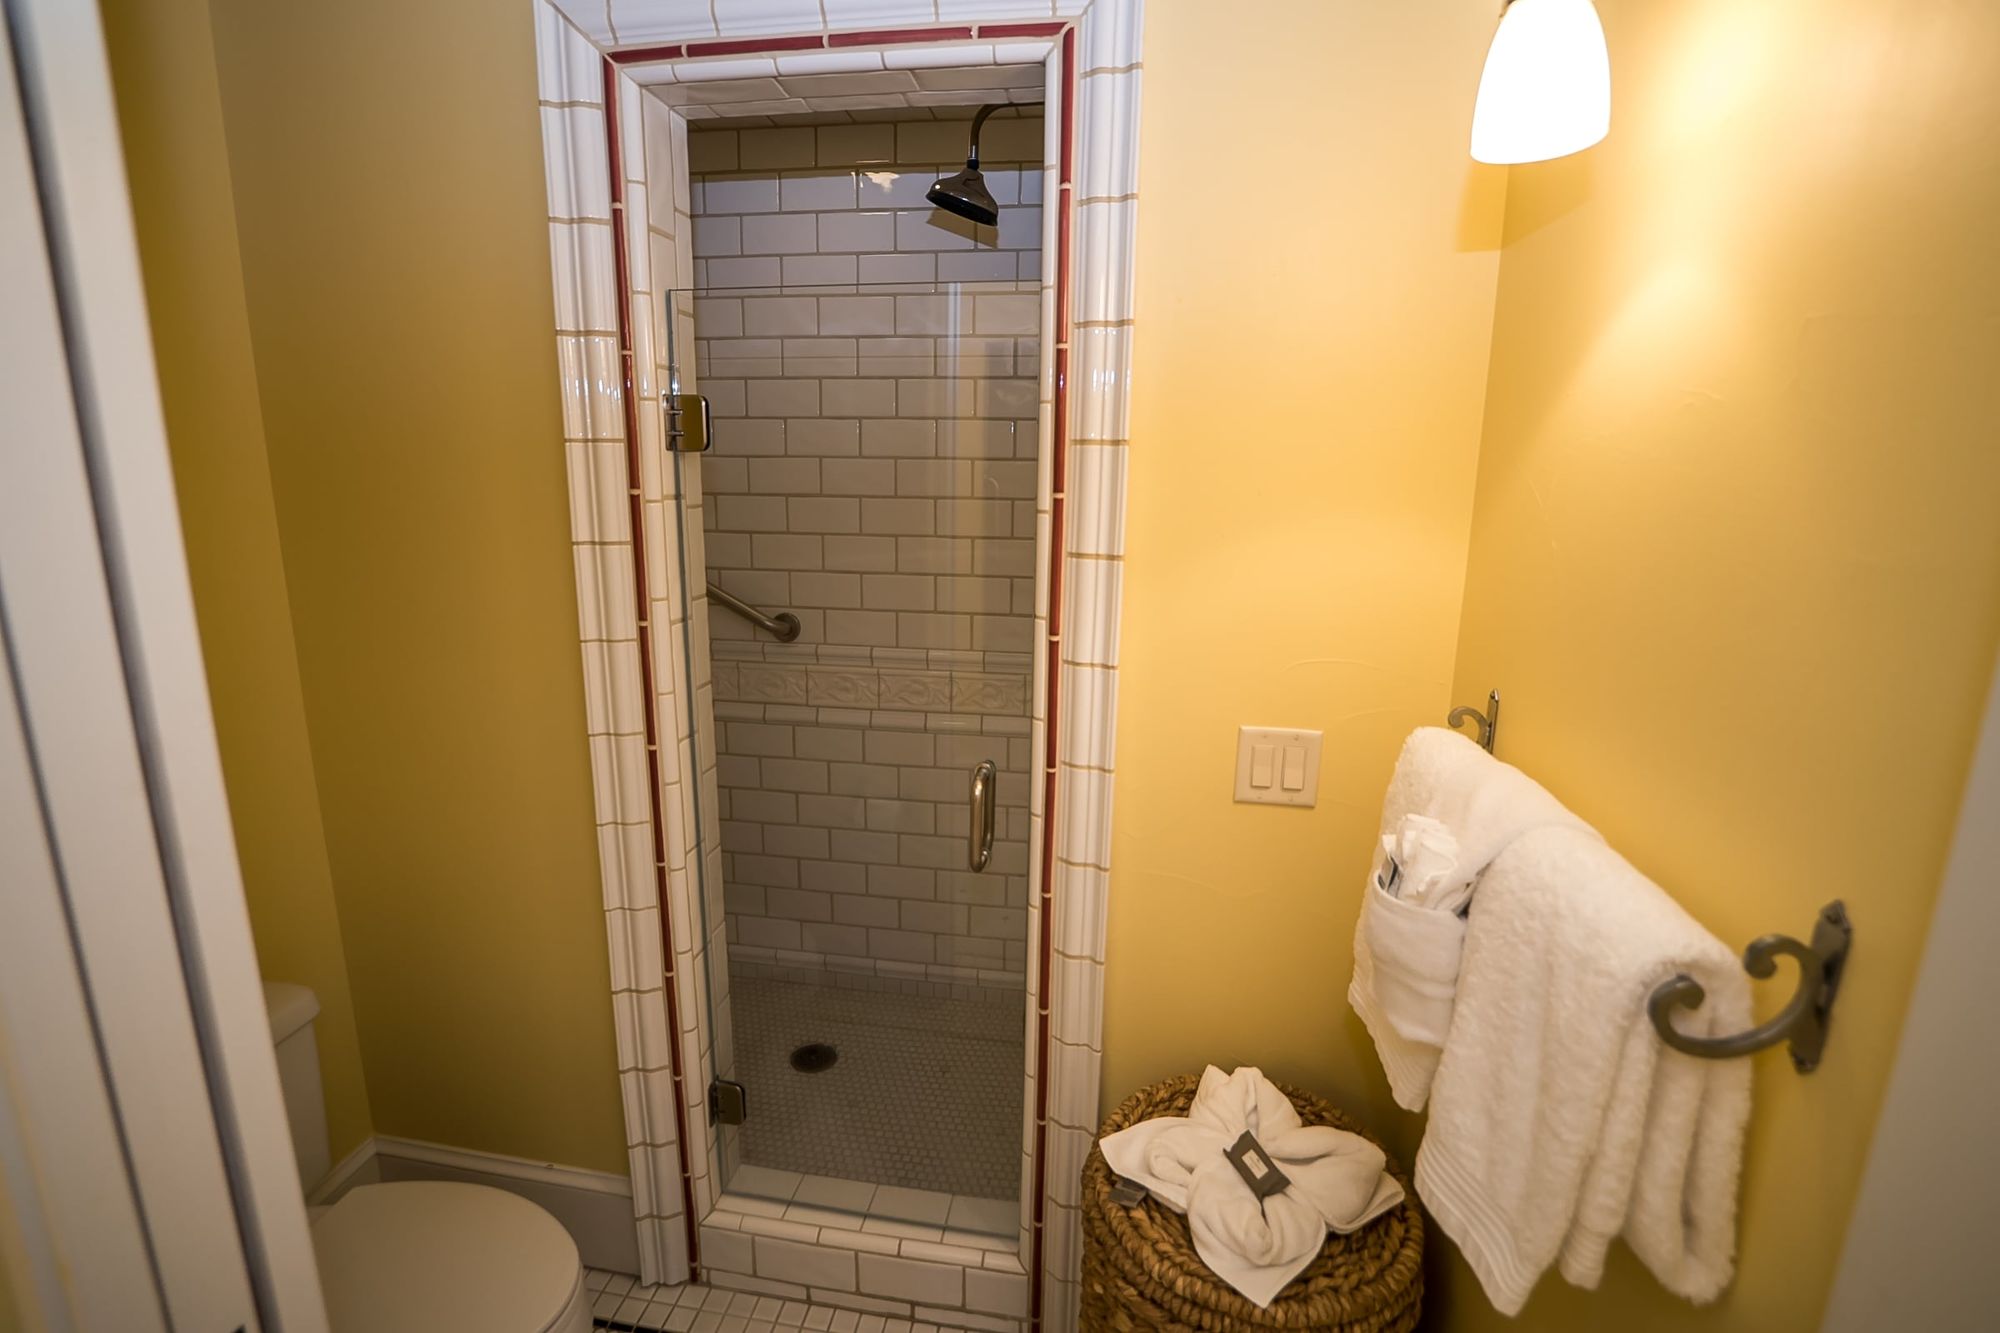 Walk-in shower, toilet, and white towels hanging on a rack